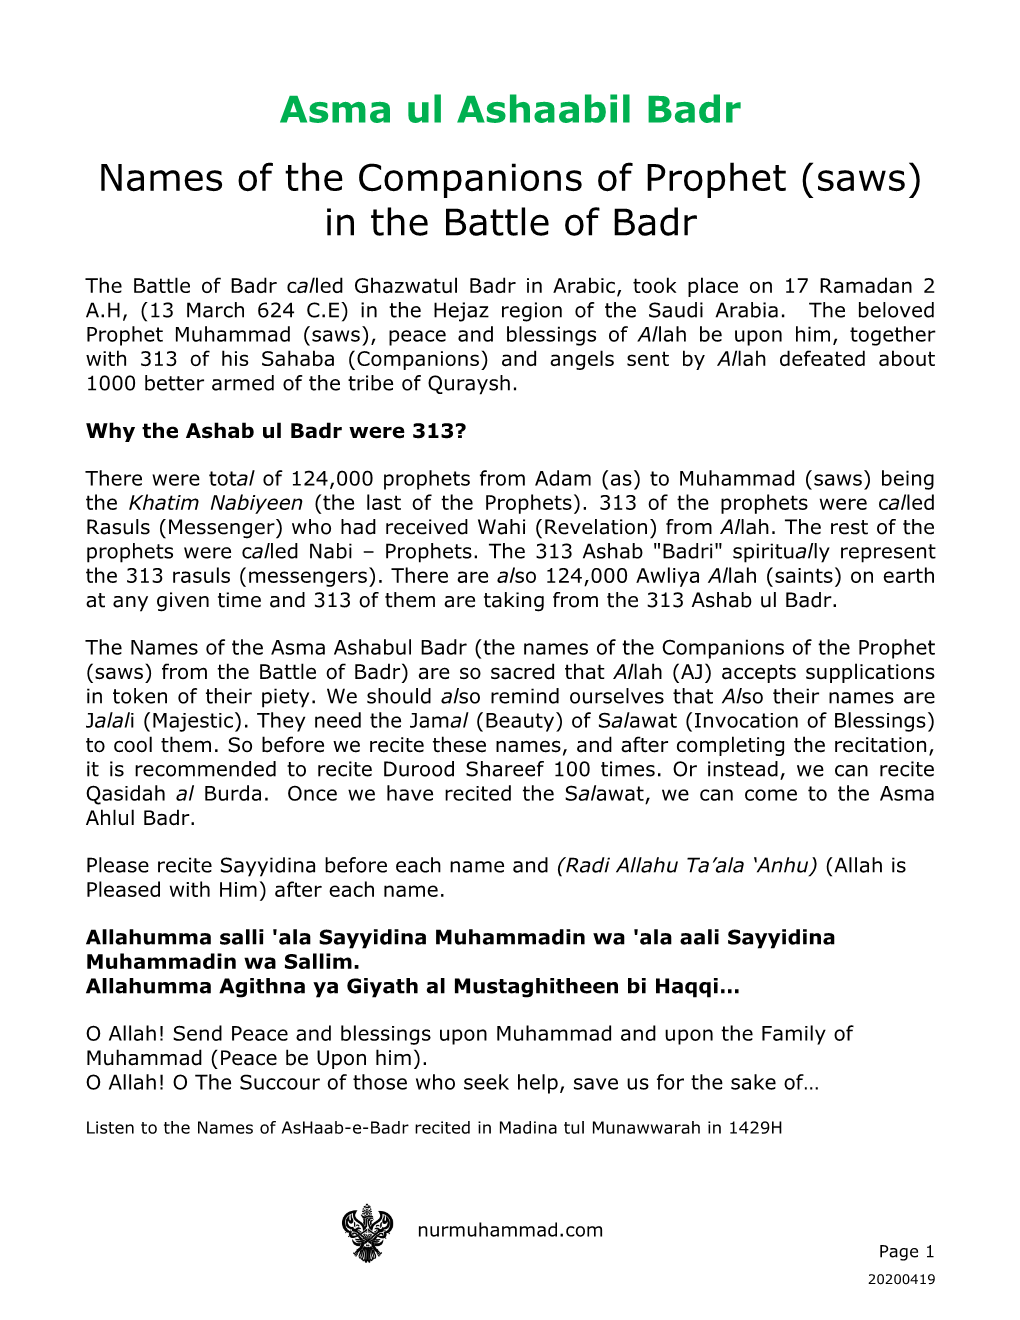 Asma Ul Ashaabil Badr Names of the Companions of Prophet (Saws) in the Battle of Badr